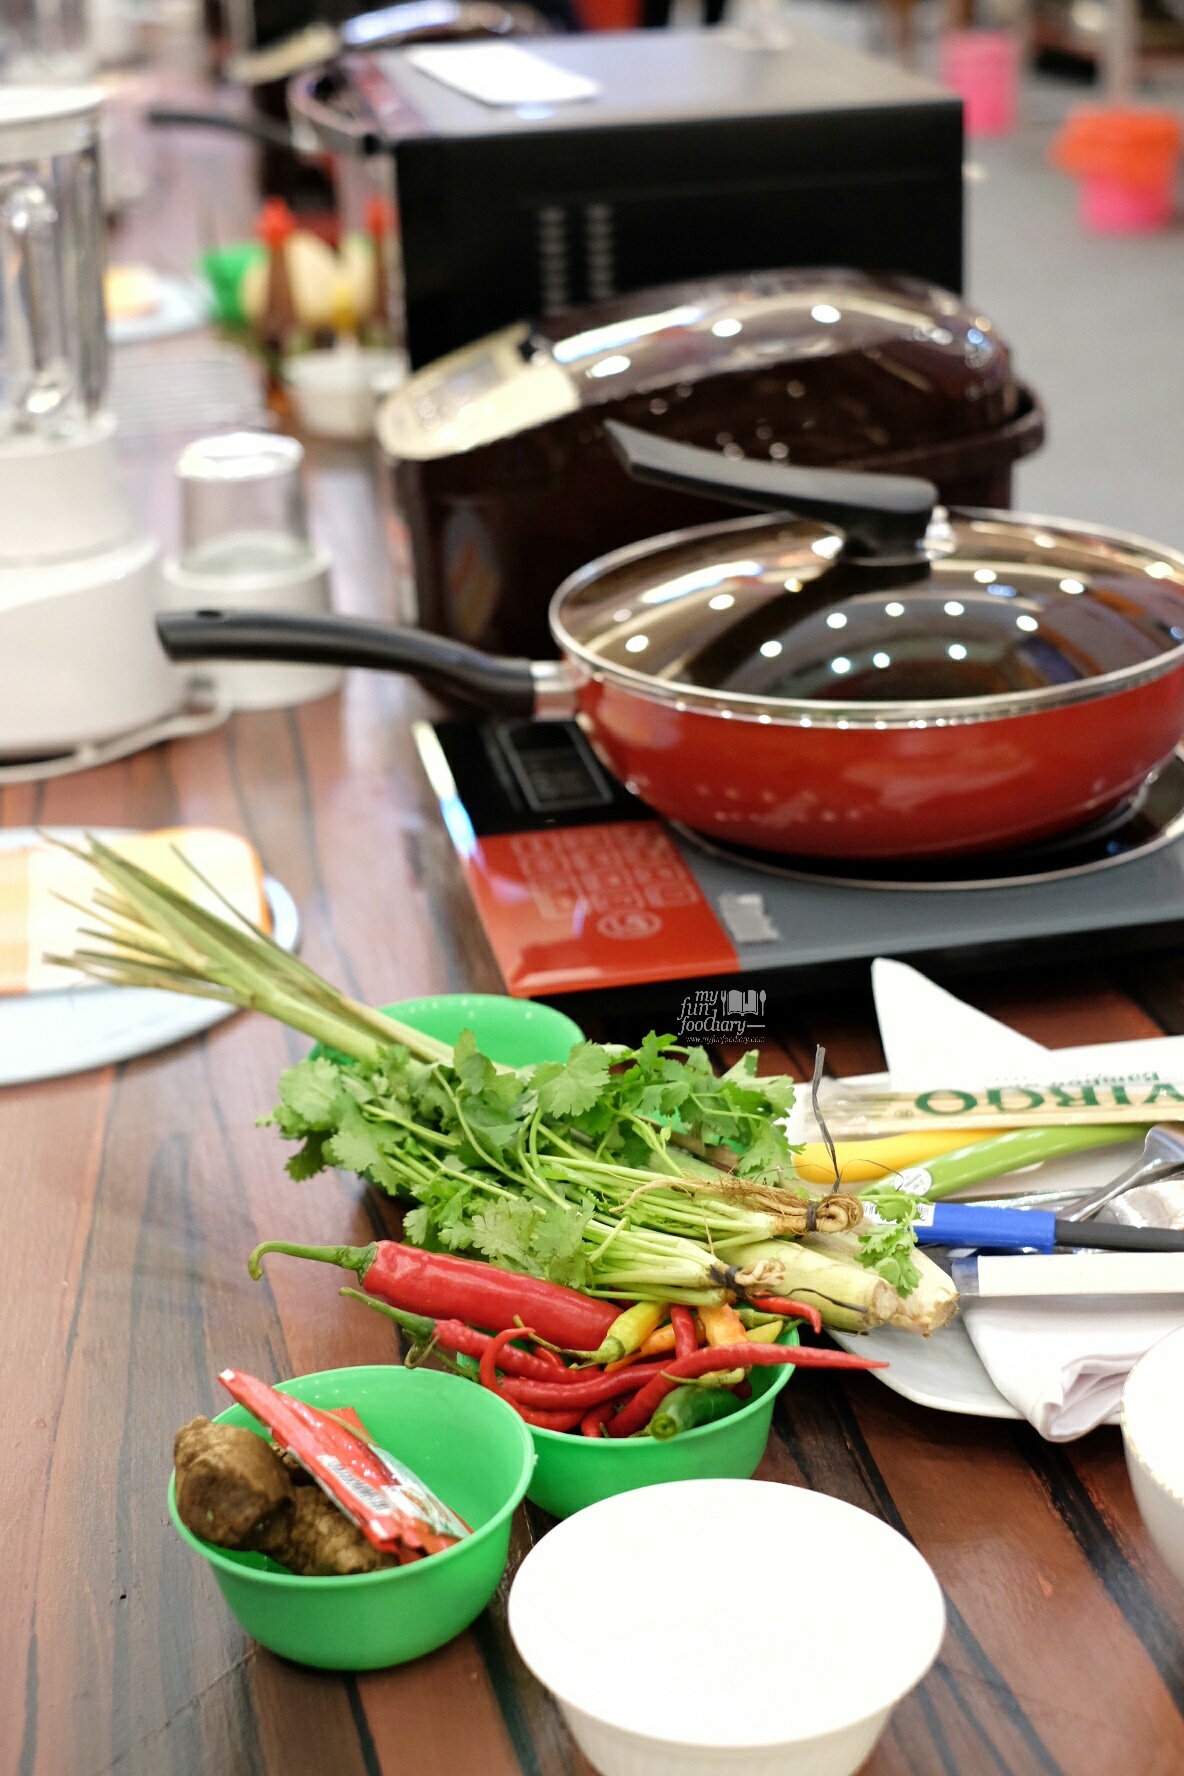 Table Setting for the Competition at Panasonic Cooking by Myfunfoodiary